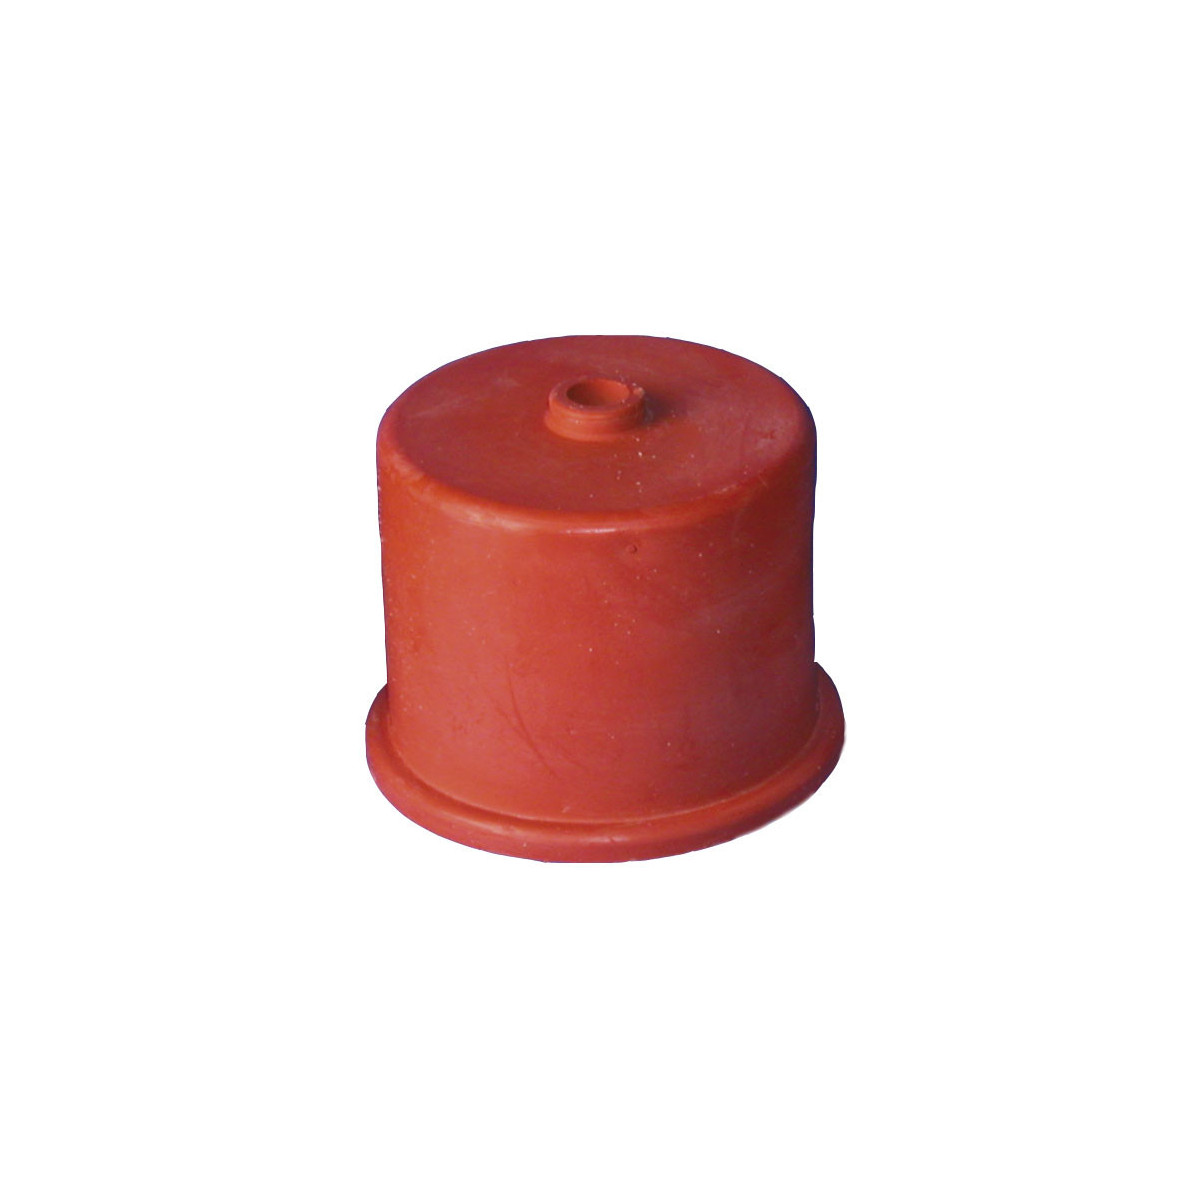 rubber cap nr 5, 60mm, with 9mm hole